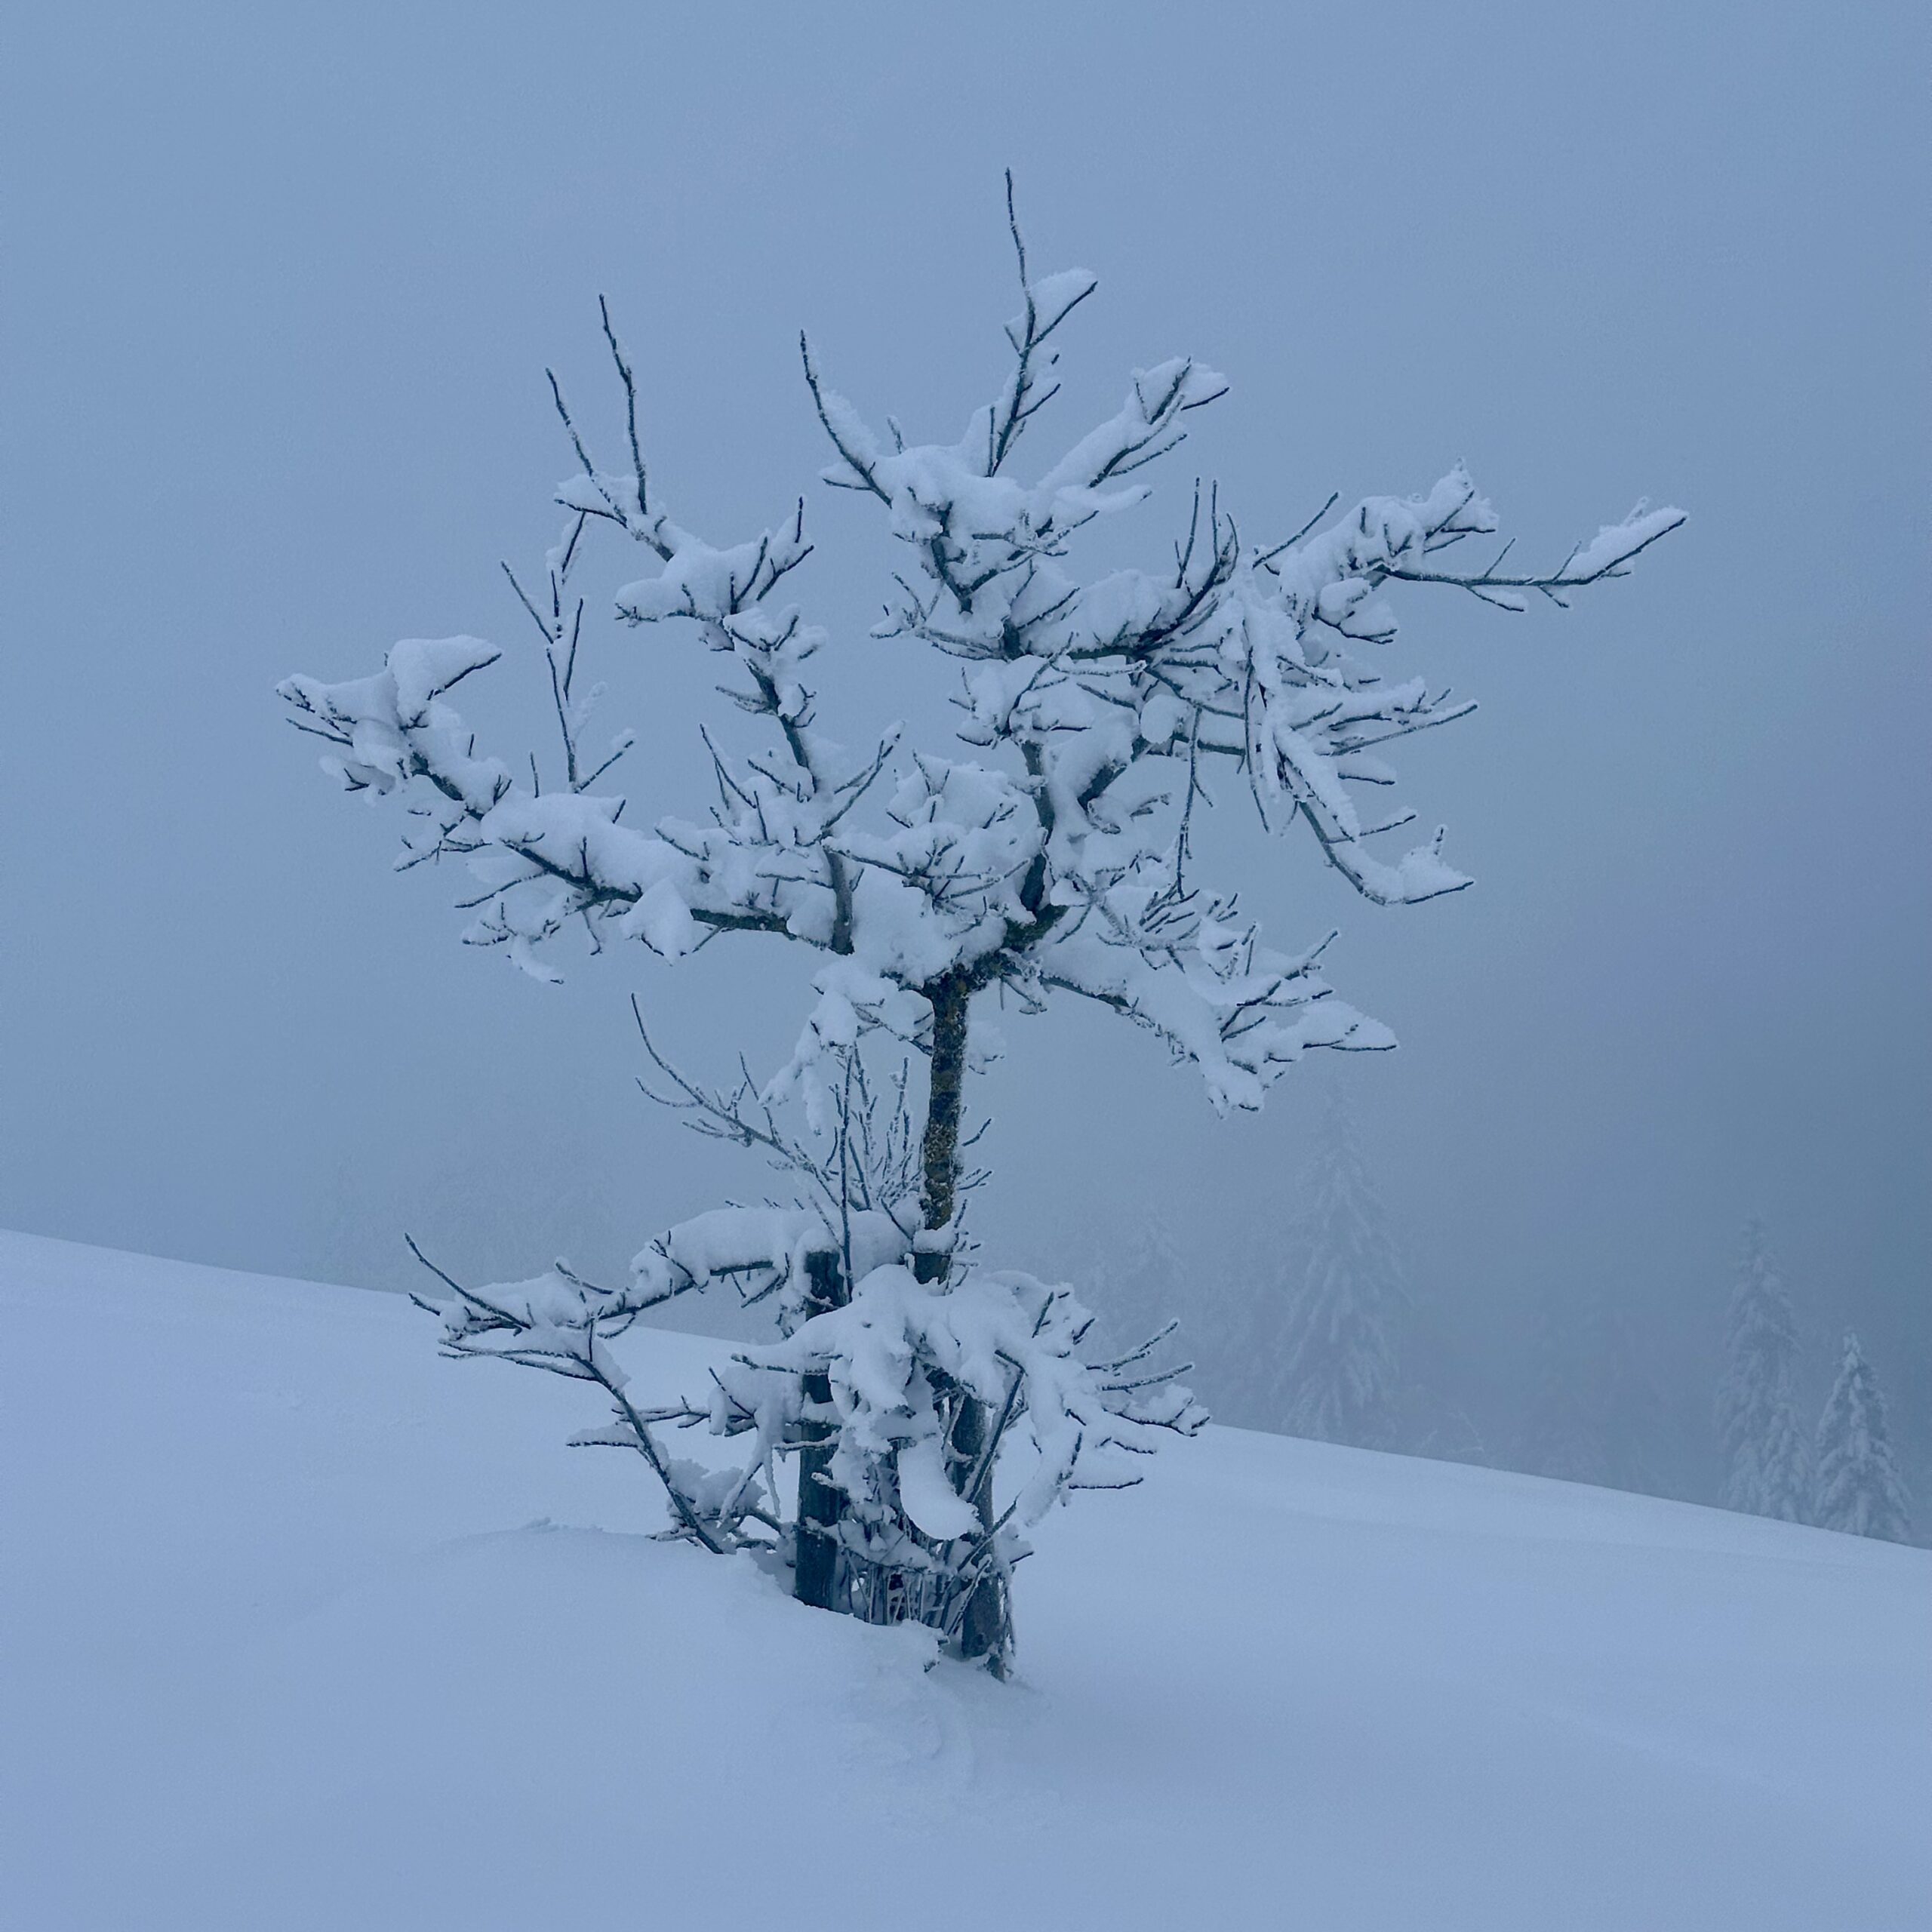 A leafless tree covered in snow on a foggy morning.